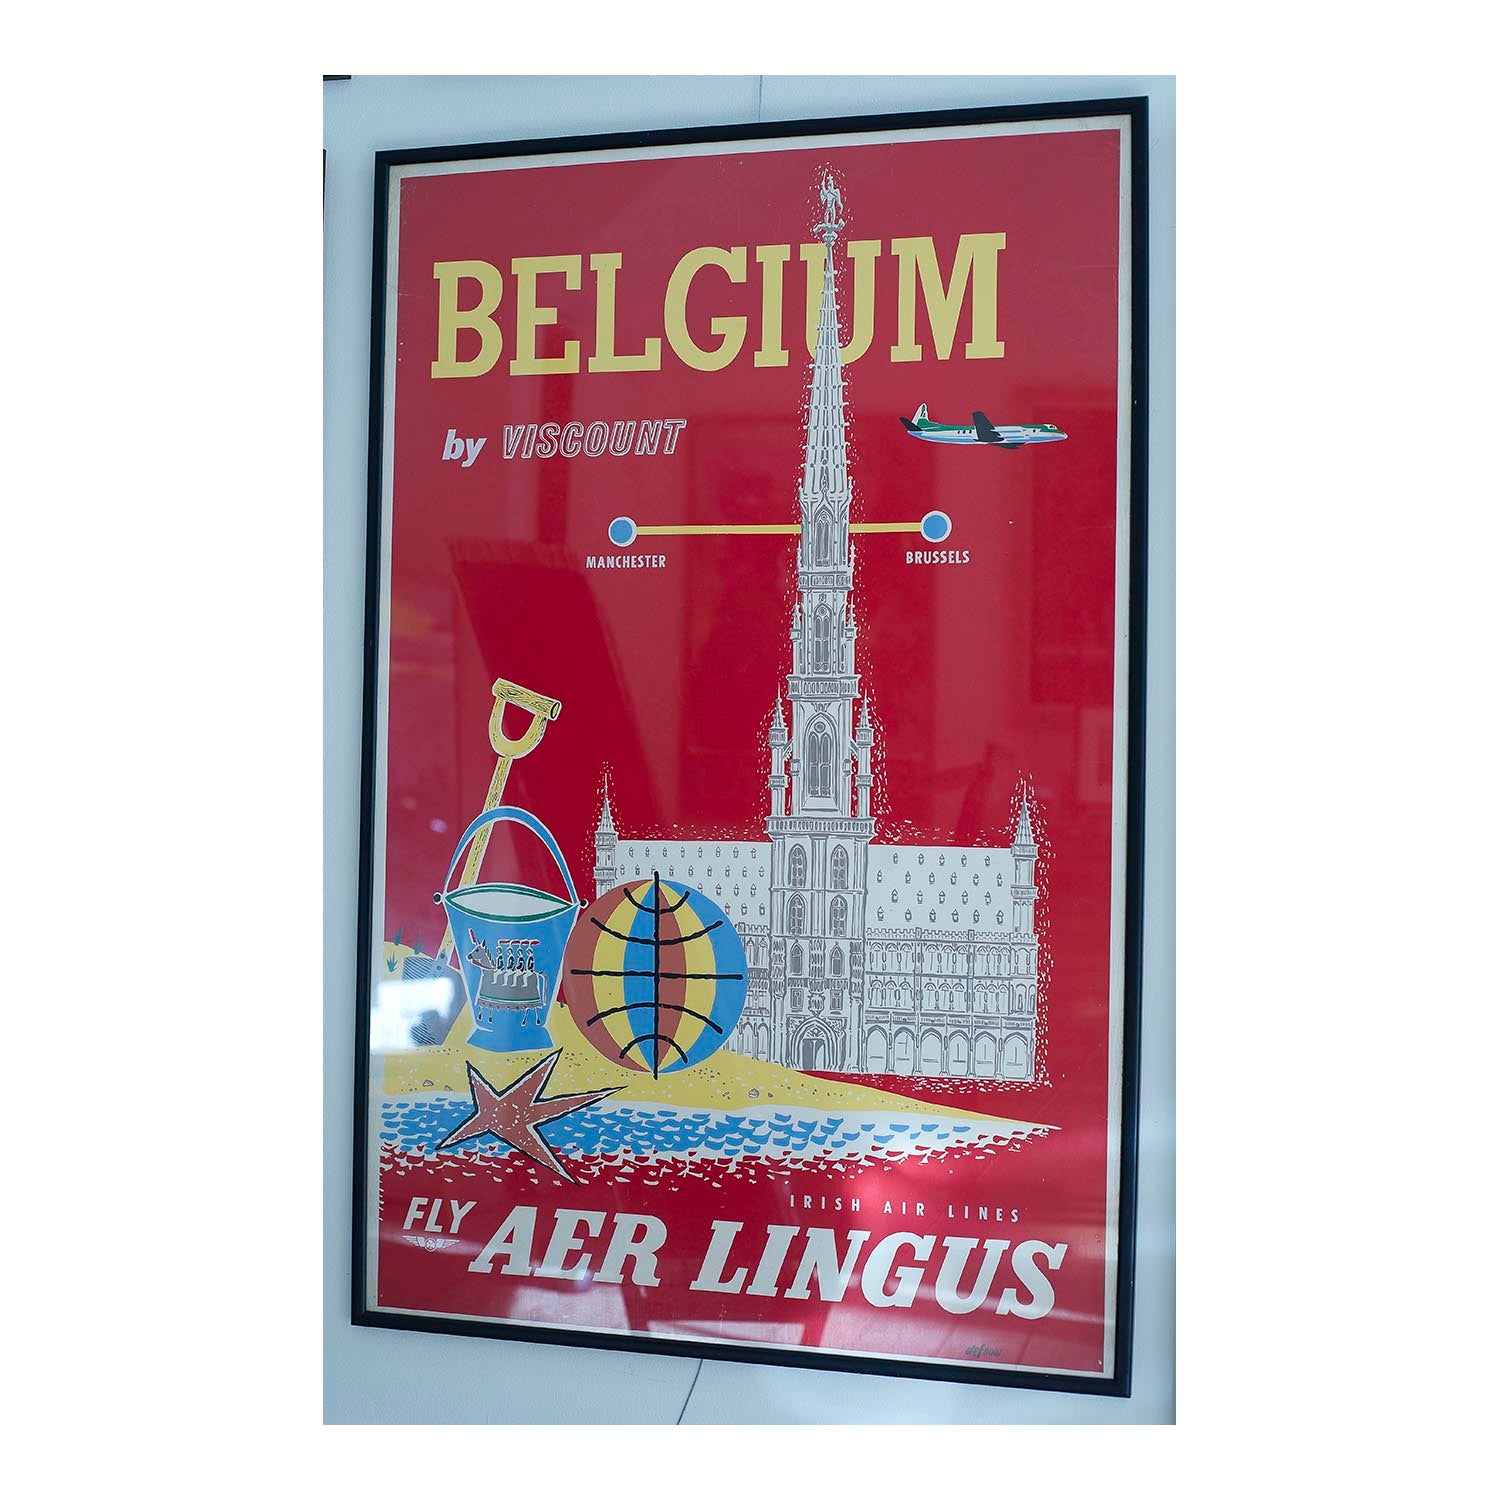 An original travel poster, Belgium by Viscount, published by Aer Lingus, c. 1957-58. The poster publicises flights from Manchester to Brussels, with a plane flying over Grand Place, Brussels, with beach toys and sand in the forefront.